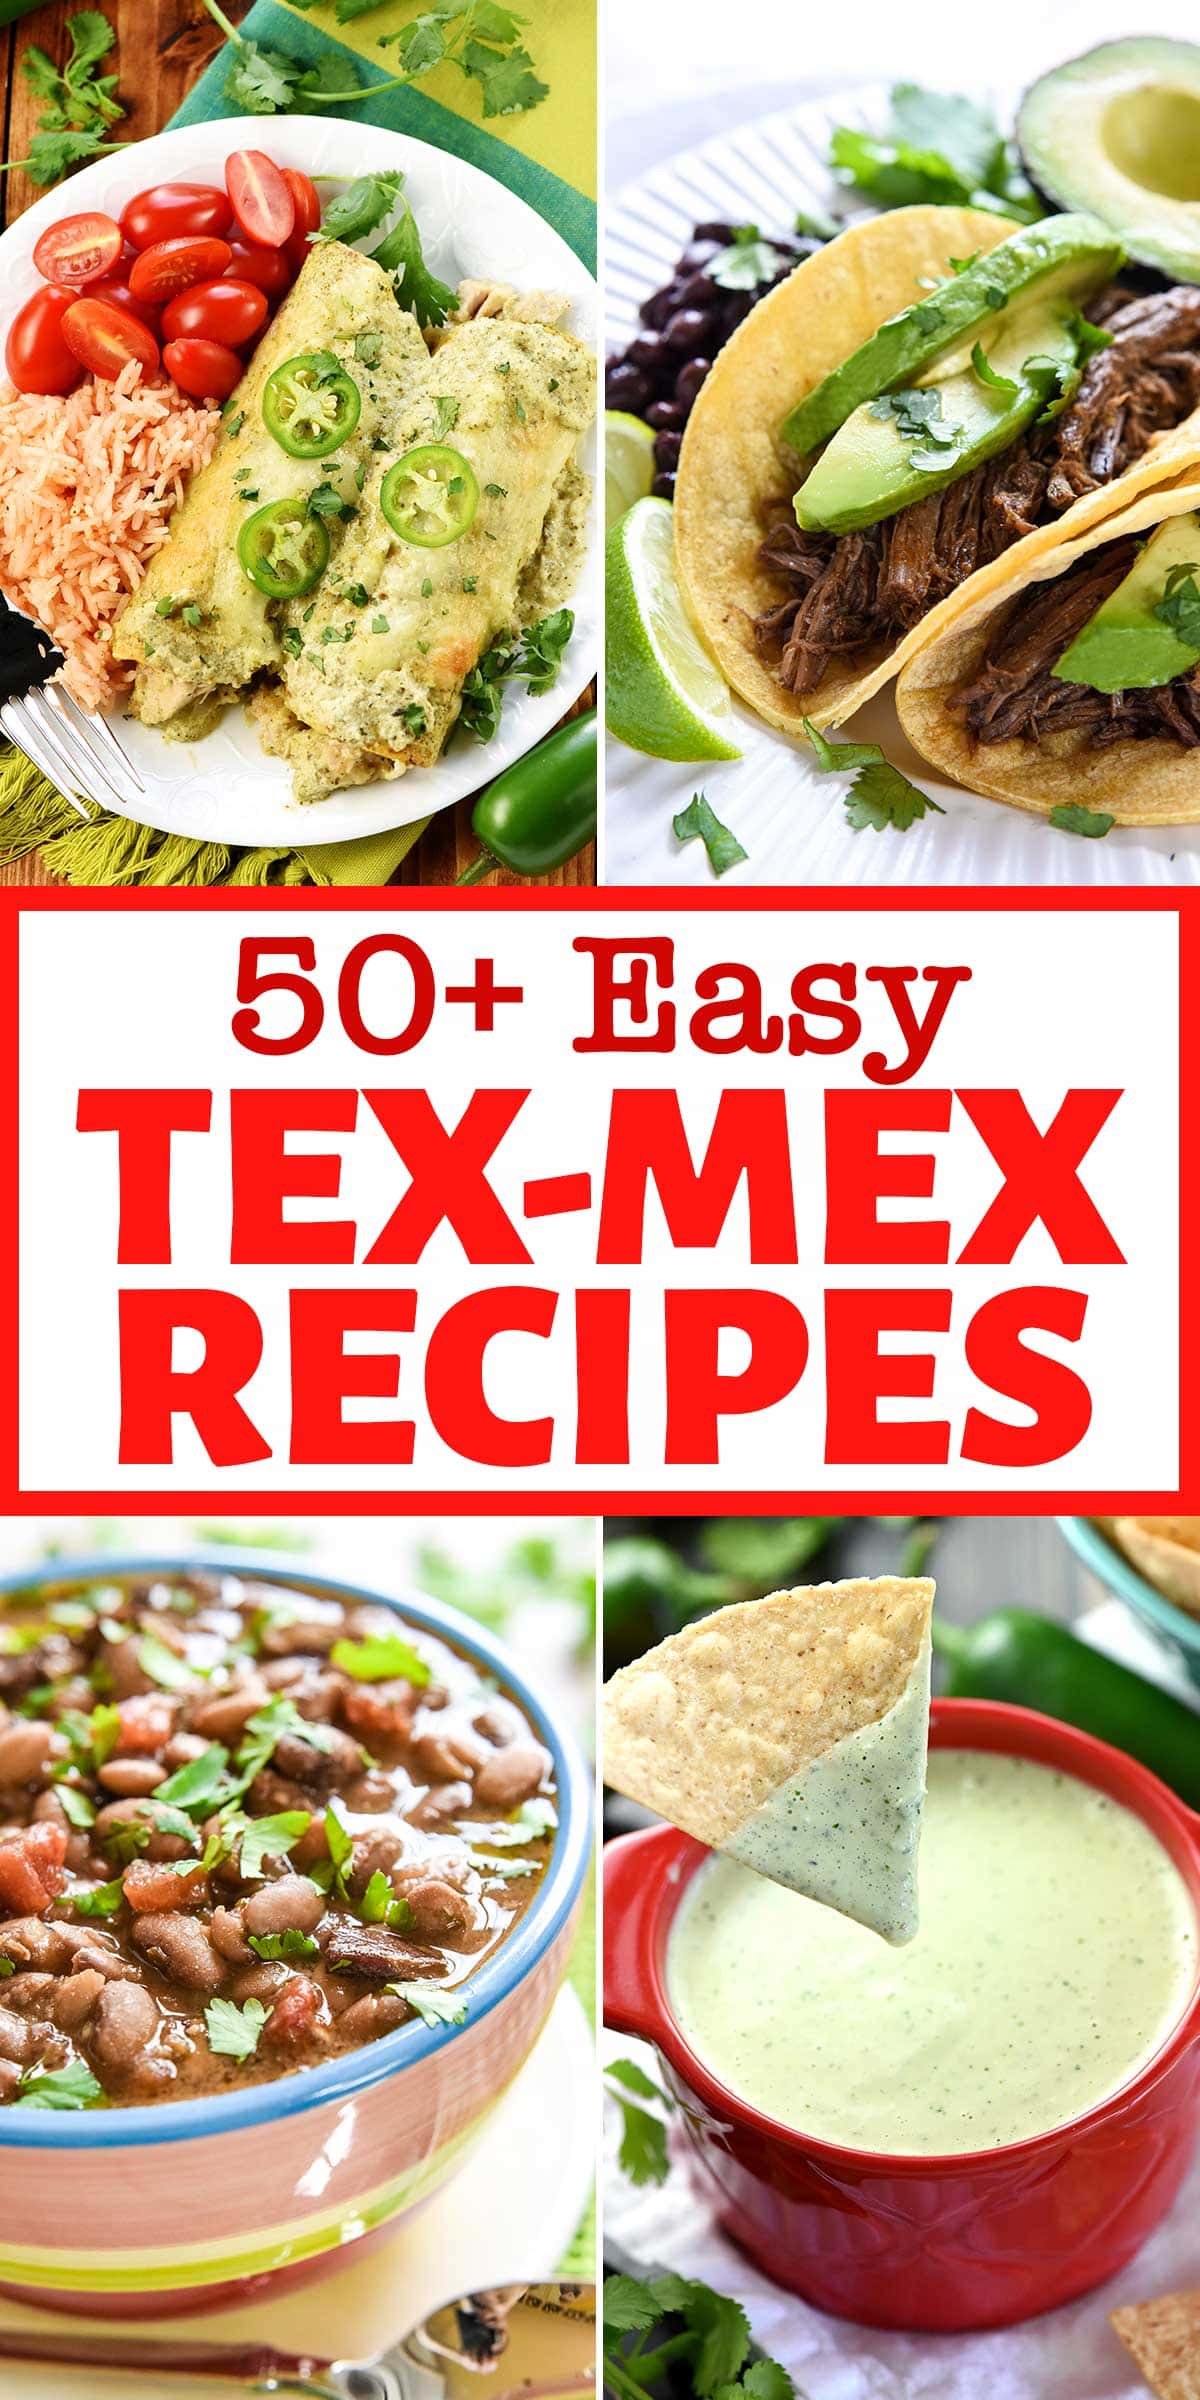 The BEST Tex-Mex Recipes ~ this scrumptious collection of recipes is perfect for Taco Tuesday, Cinco de Mayo, or any day of the year! From tacos to enchiladas, from salsa to queso, from rice to beans, from drinks to dessert (and so much more!), these classic Tex-Mex food ideas are easy to make from scratch and absolutely mouthwatering. | FiveHeartHome.com via @fivehearthome